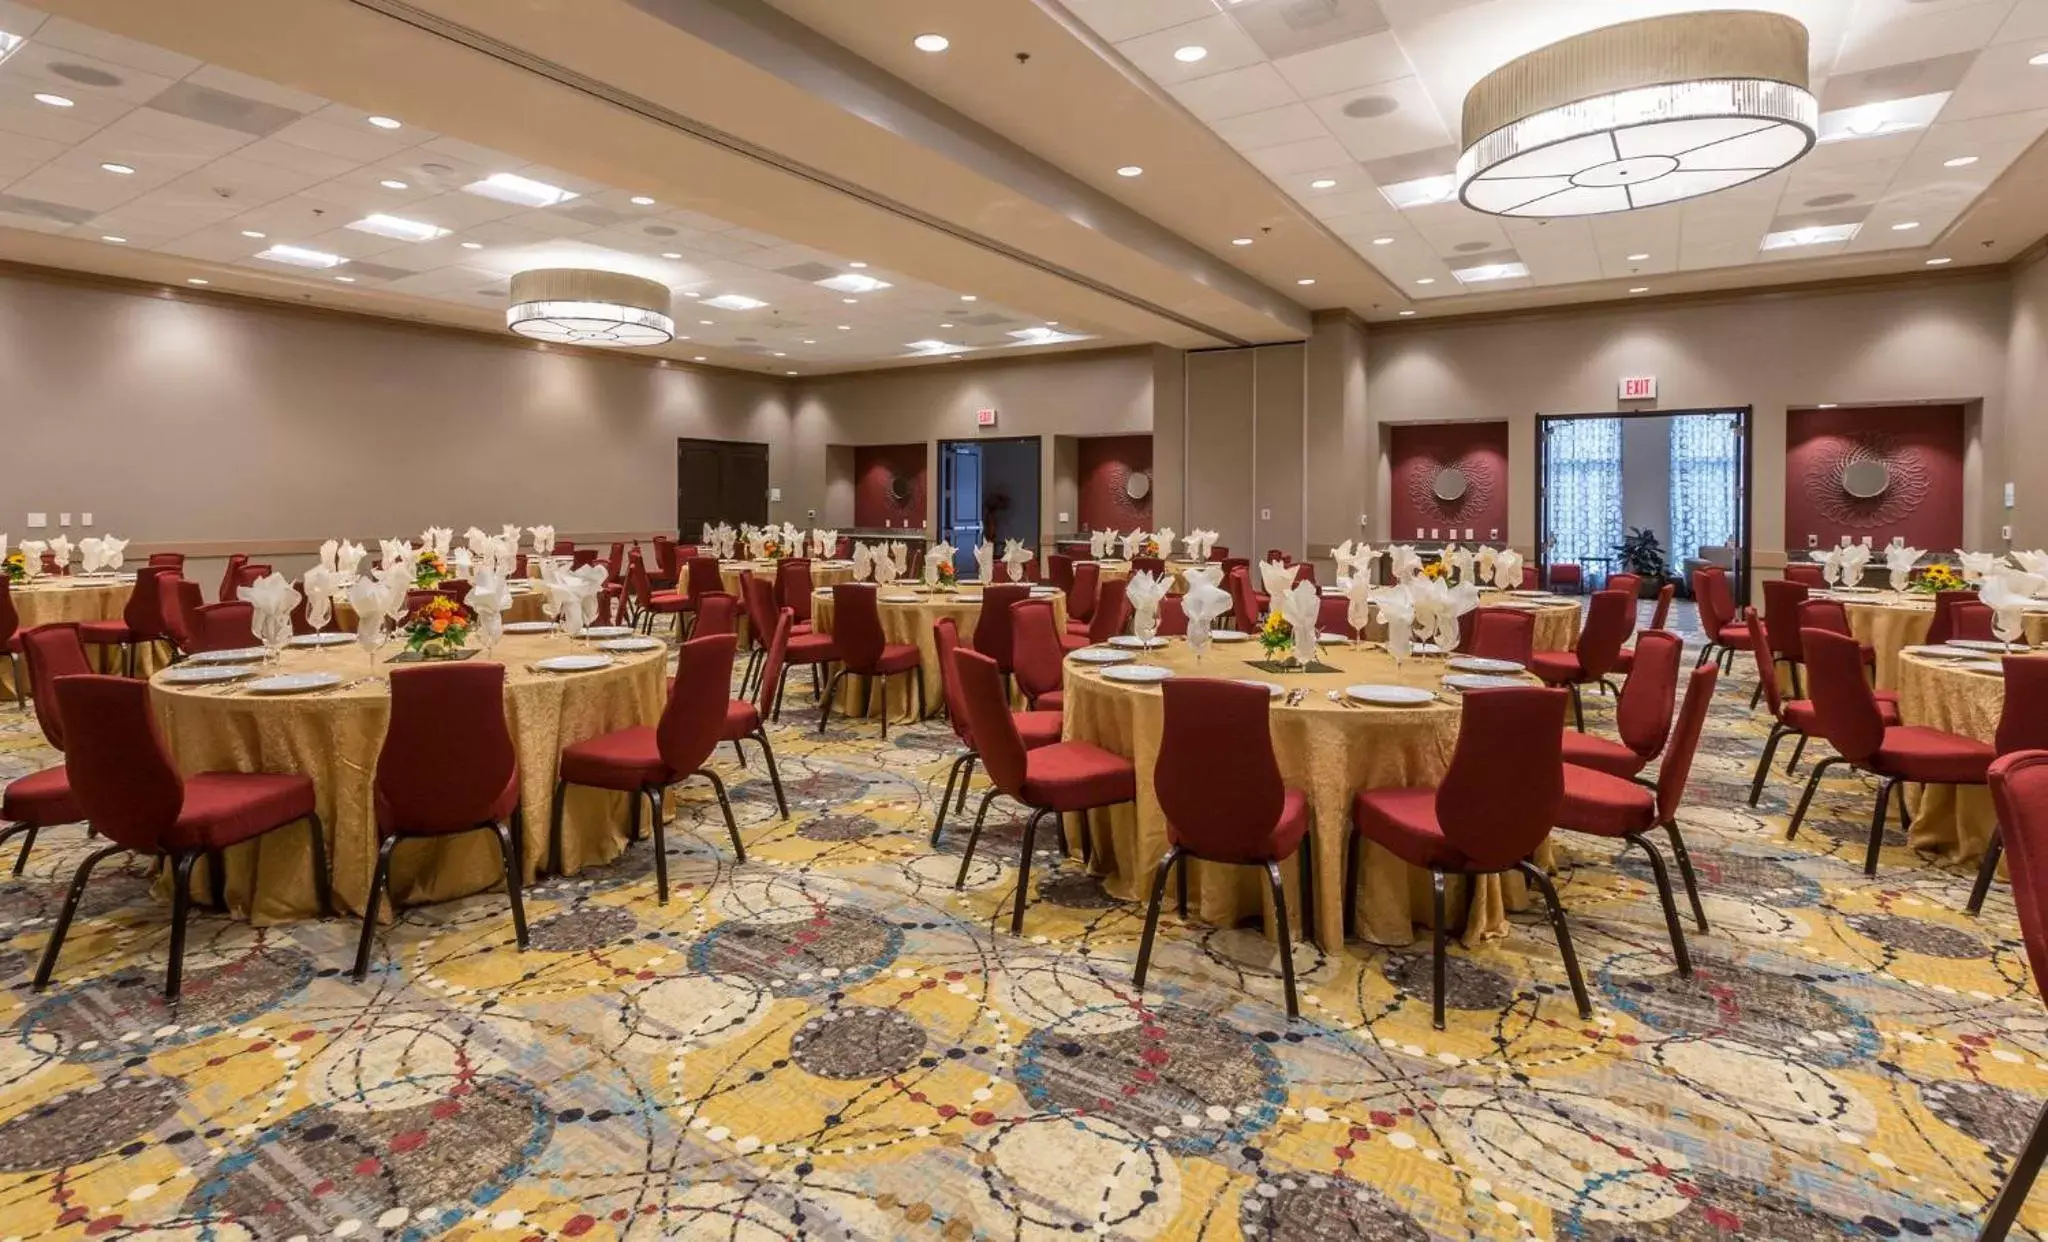 Meeting/conference room, Banquet Facilities in Crowne Plaza Shenandoah - The Woodlands